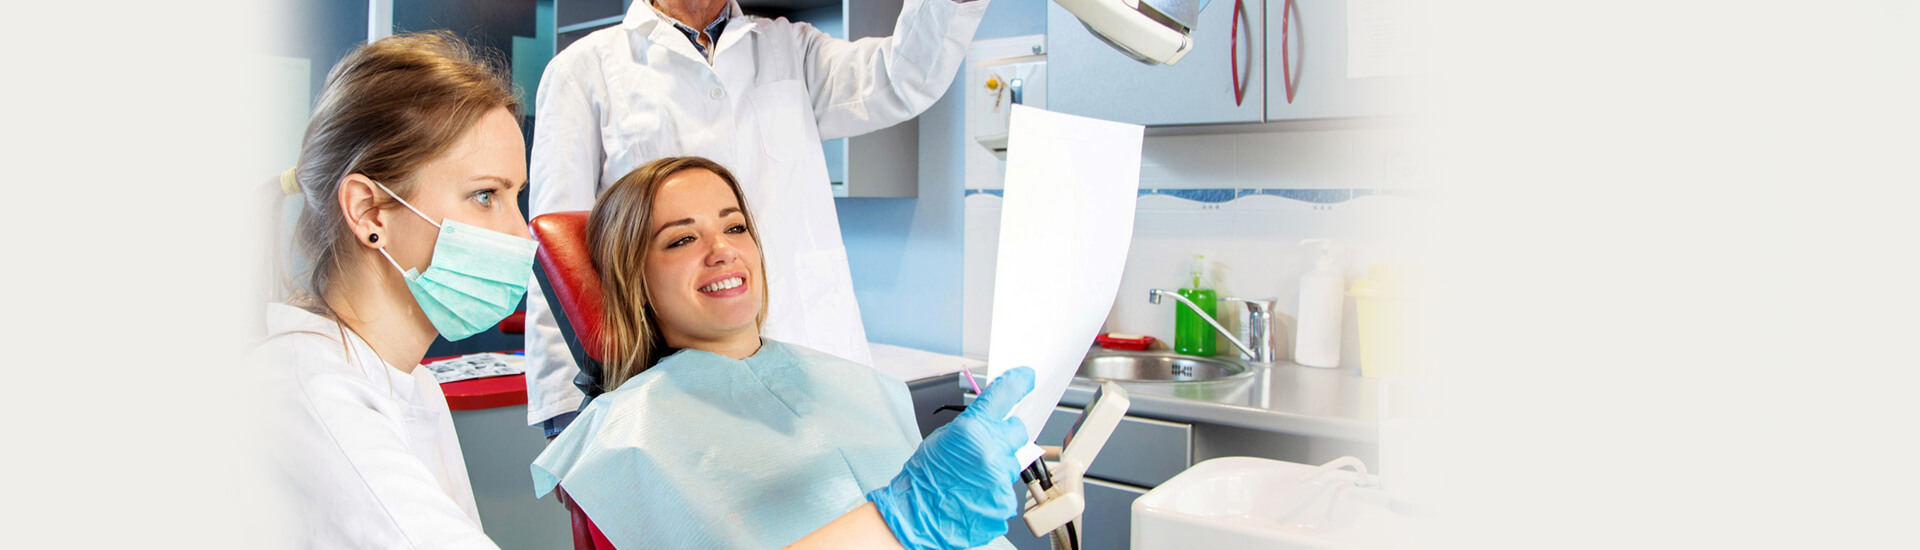 $120 New Patient Exams, Full Mouth Xrays & Healthy Mouth Cleaning.